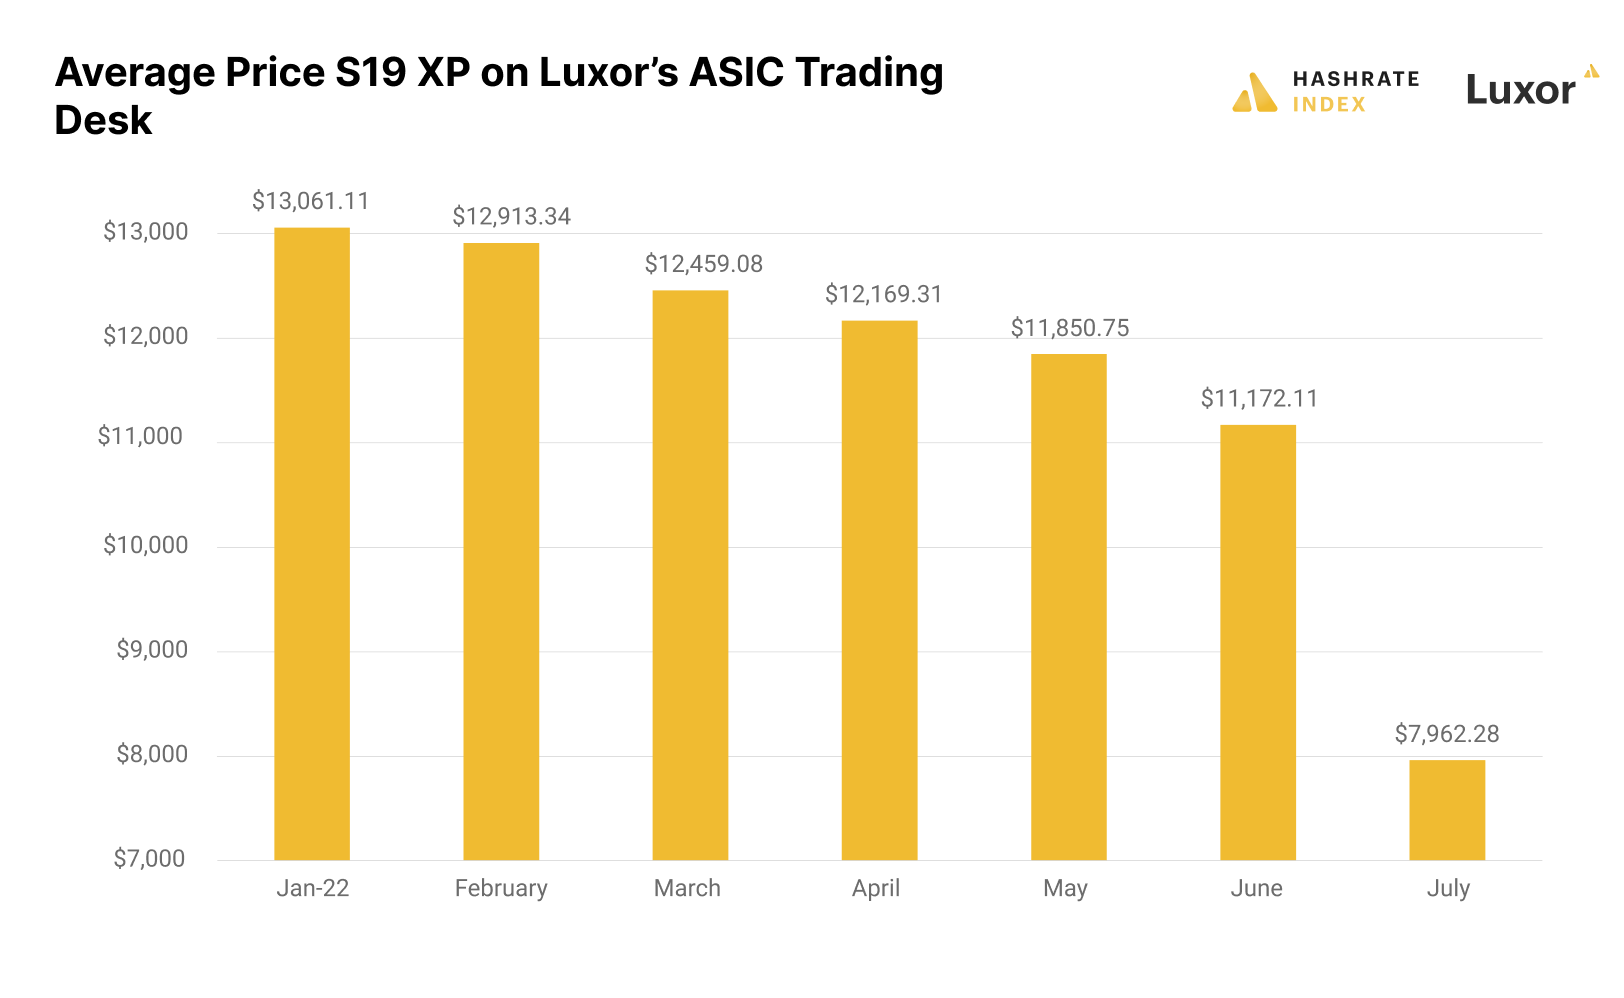 Antminer S19 XP prices based on Luxor's ASIC Trading Desk data (January - July 2022)